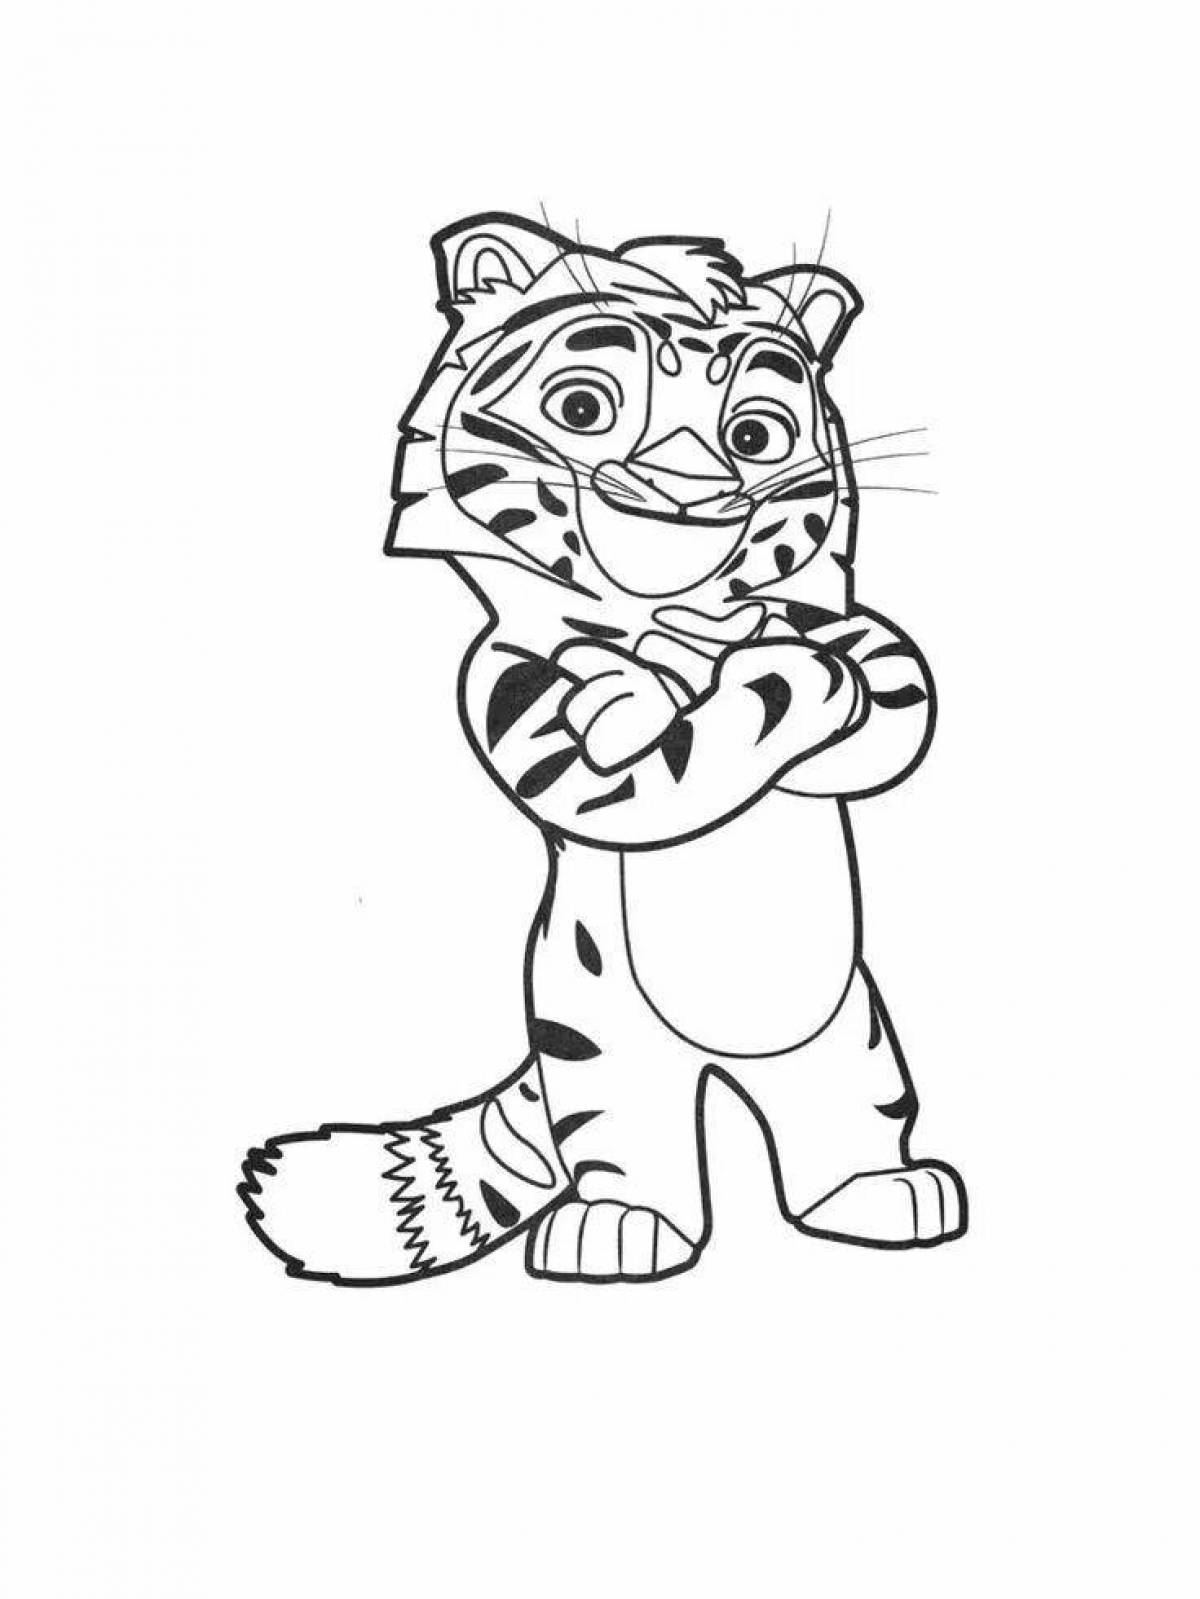 Living tiger coloring page